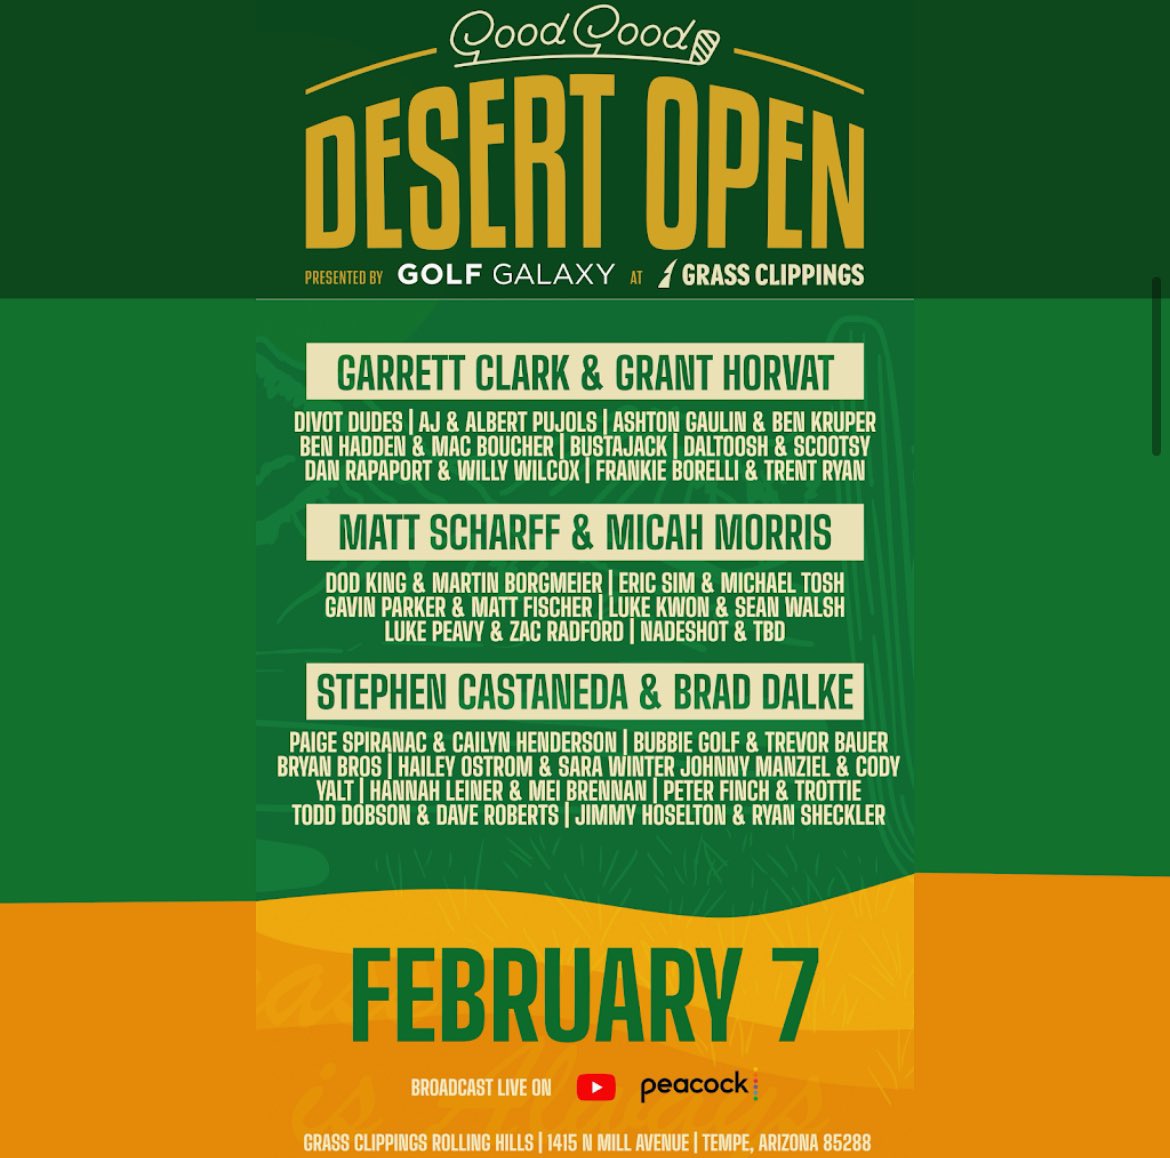 Tickets are LIVE for the Good Good Desert Open presented by @golfgalaxy at Grass Clippings Rolling Hills 🙌 Get your tickets here!👇 eventbrite.com/e/good-good-de…